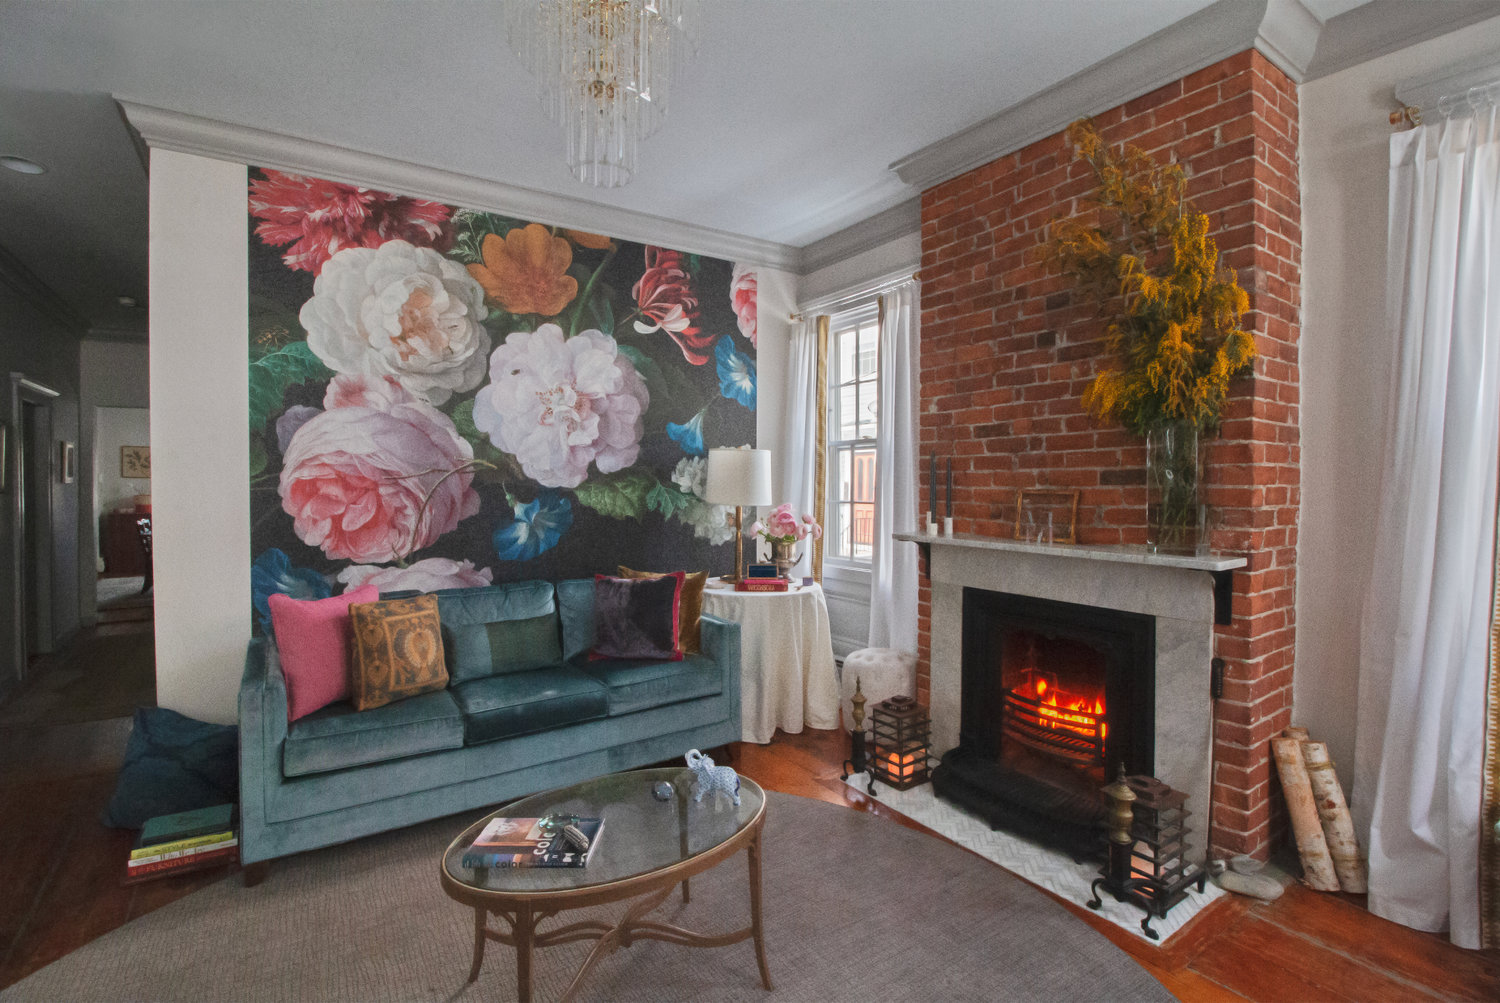 A pair of lanterns from their former home flank a fireplace salvaged from a Beacon Hill demo. The mural creates a stunning backdrop to furnishings like a Mitchell Gold + Bob Williams sofa.